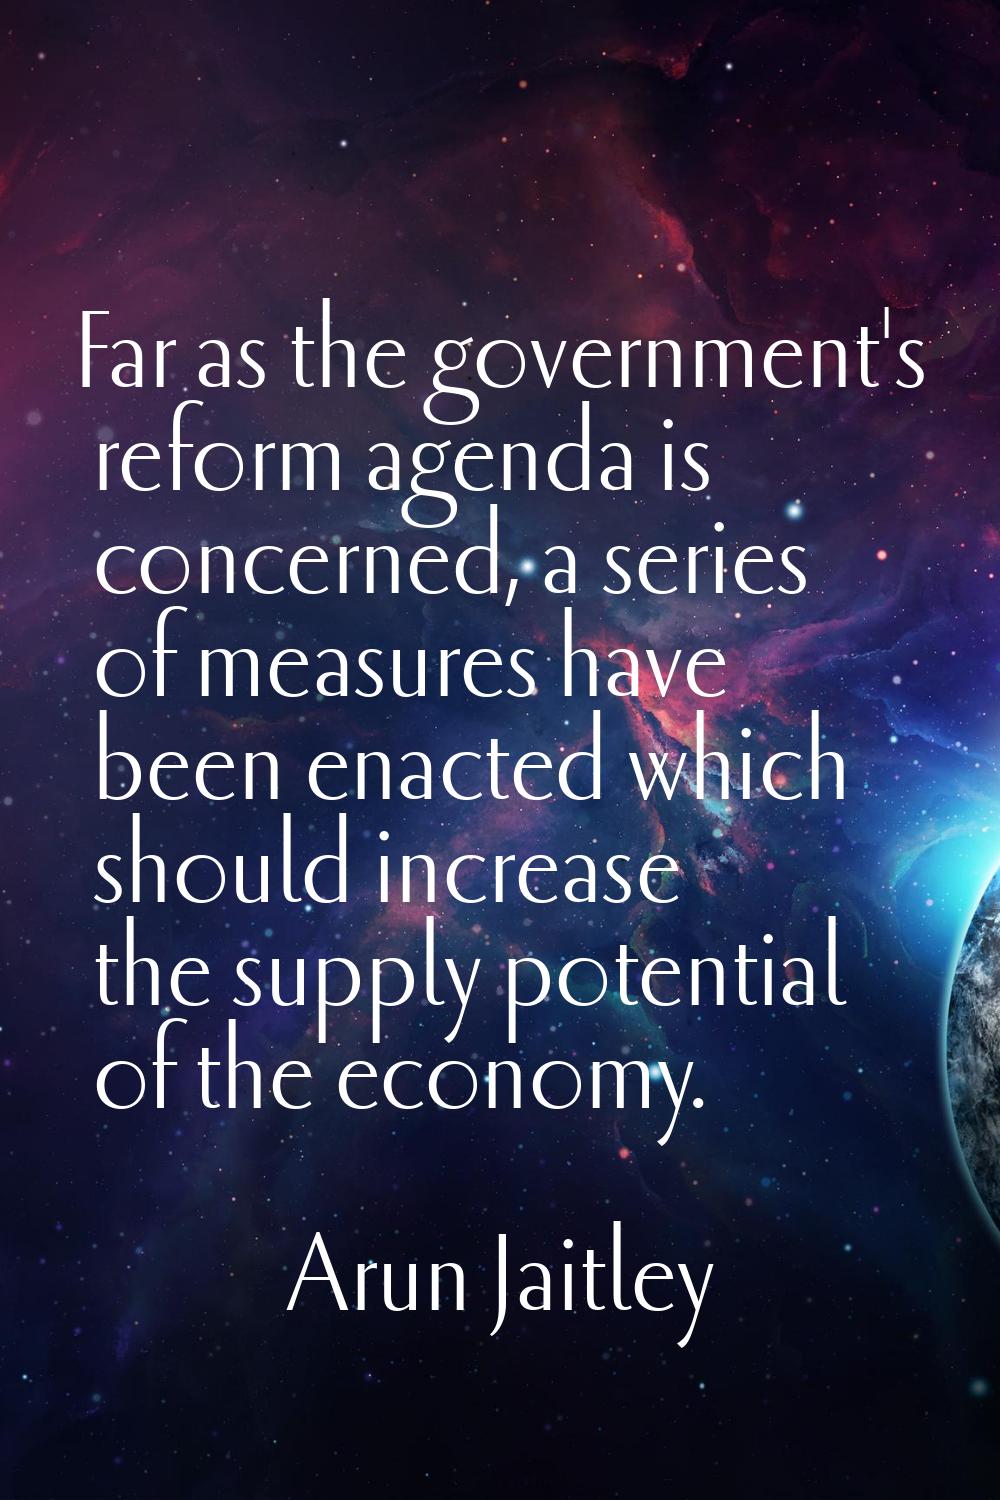 Far as the government's reform agenda is concerned, a series of measures have been enacted which sh